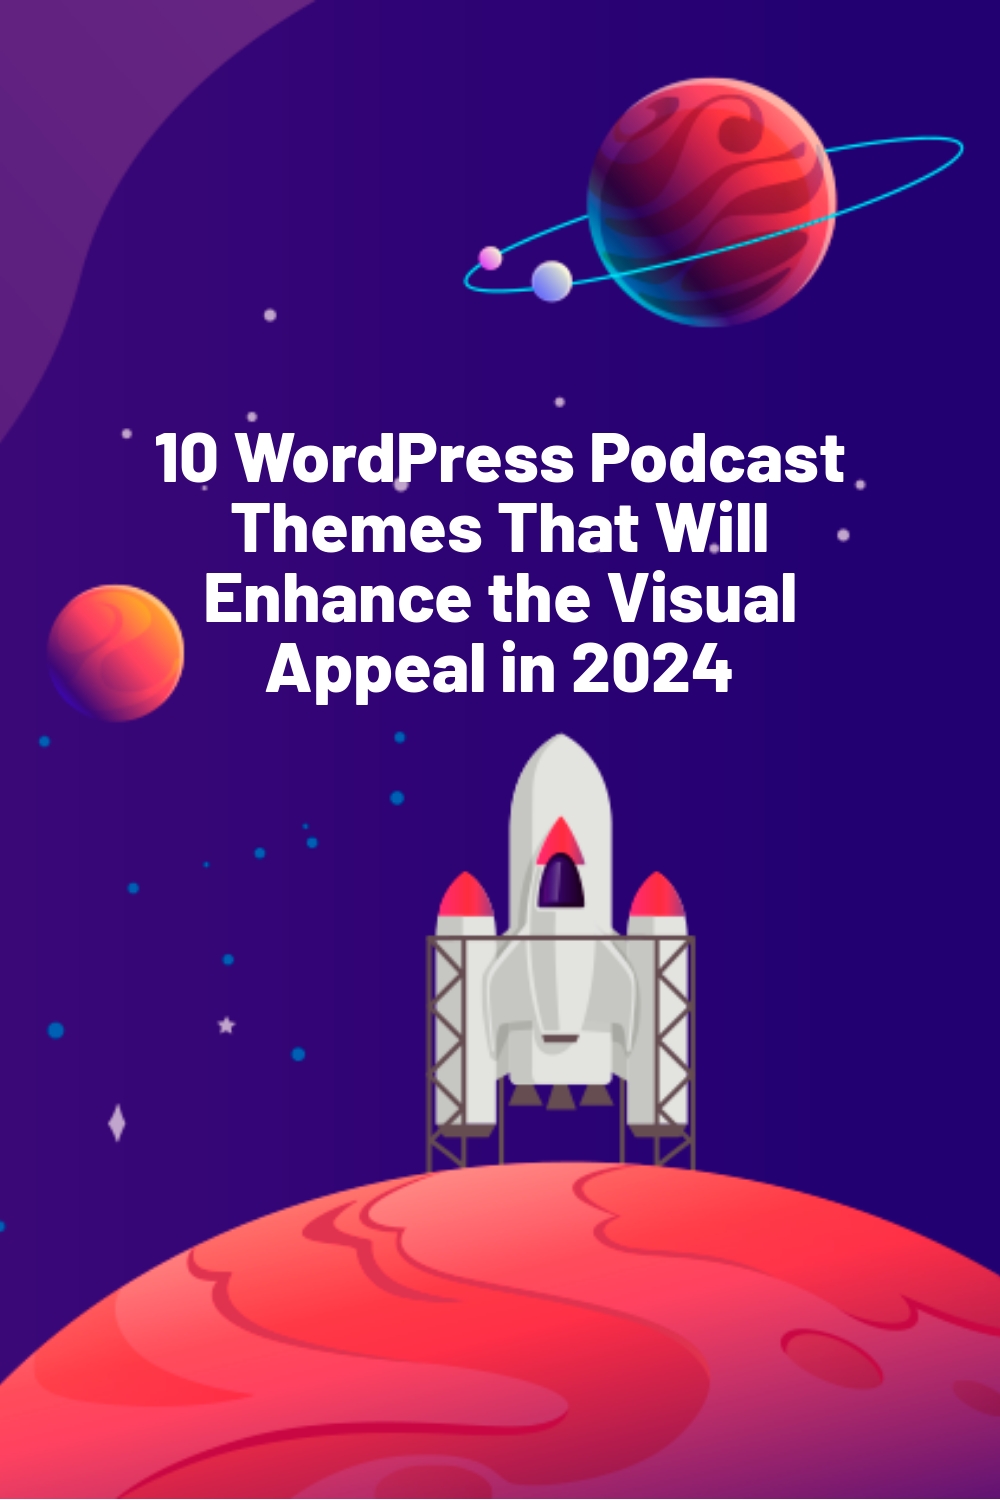 10 WordPress Podcast Themes That Will Enhance the Visual Appeal in 2024